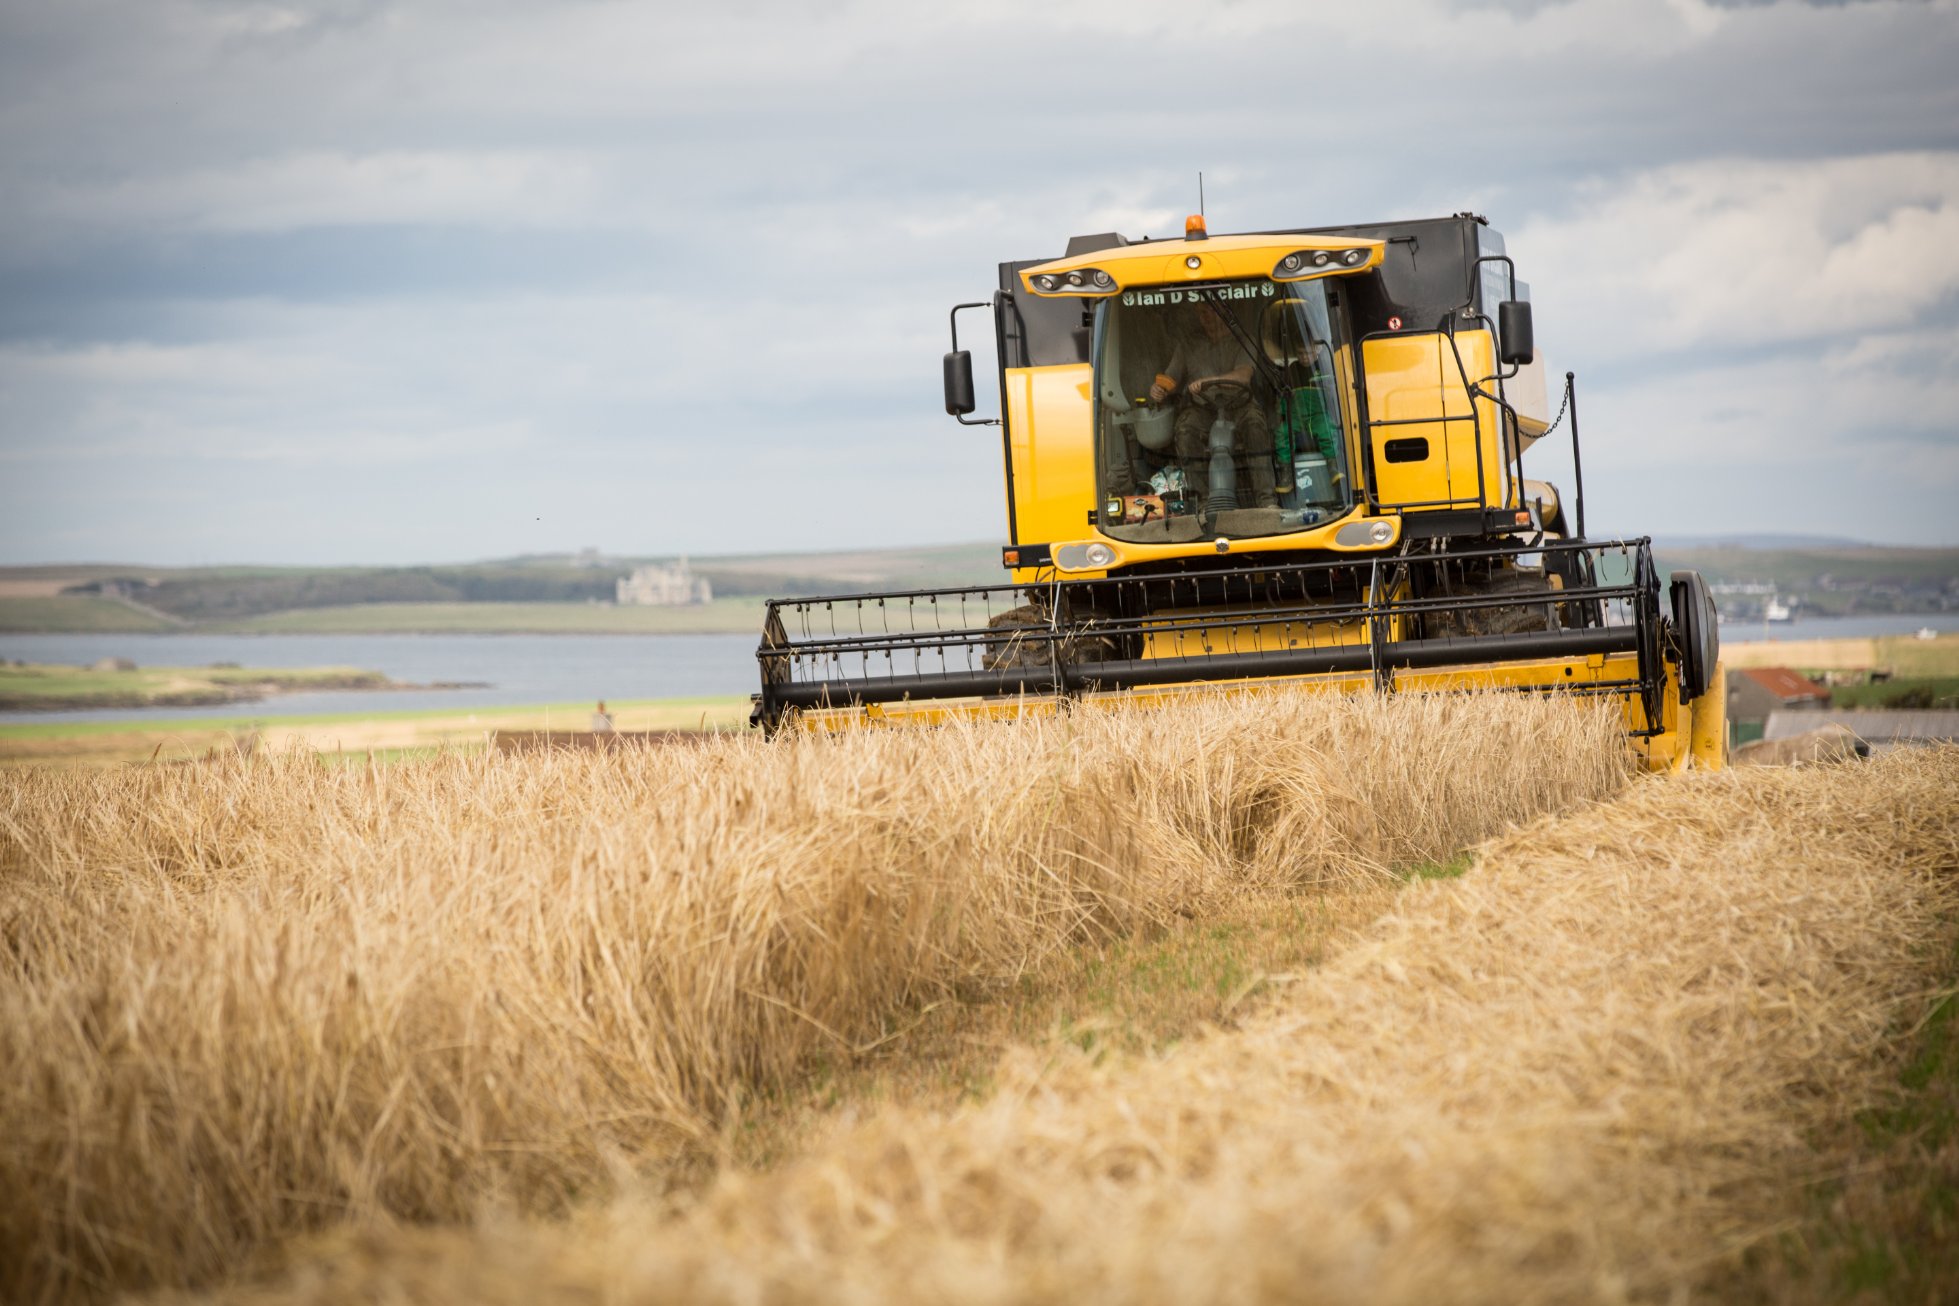 The bere harvest underway at the Agronomy Institute at Orkney College UHI